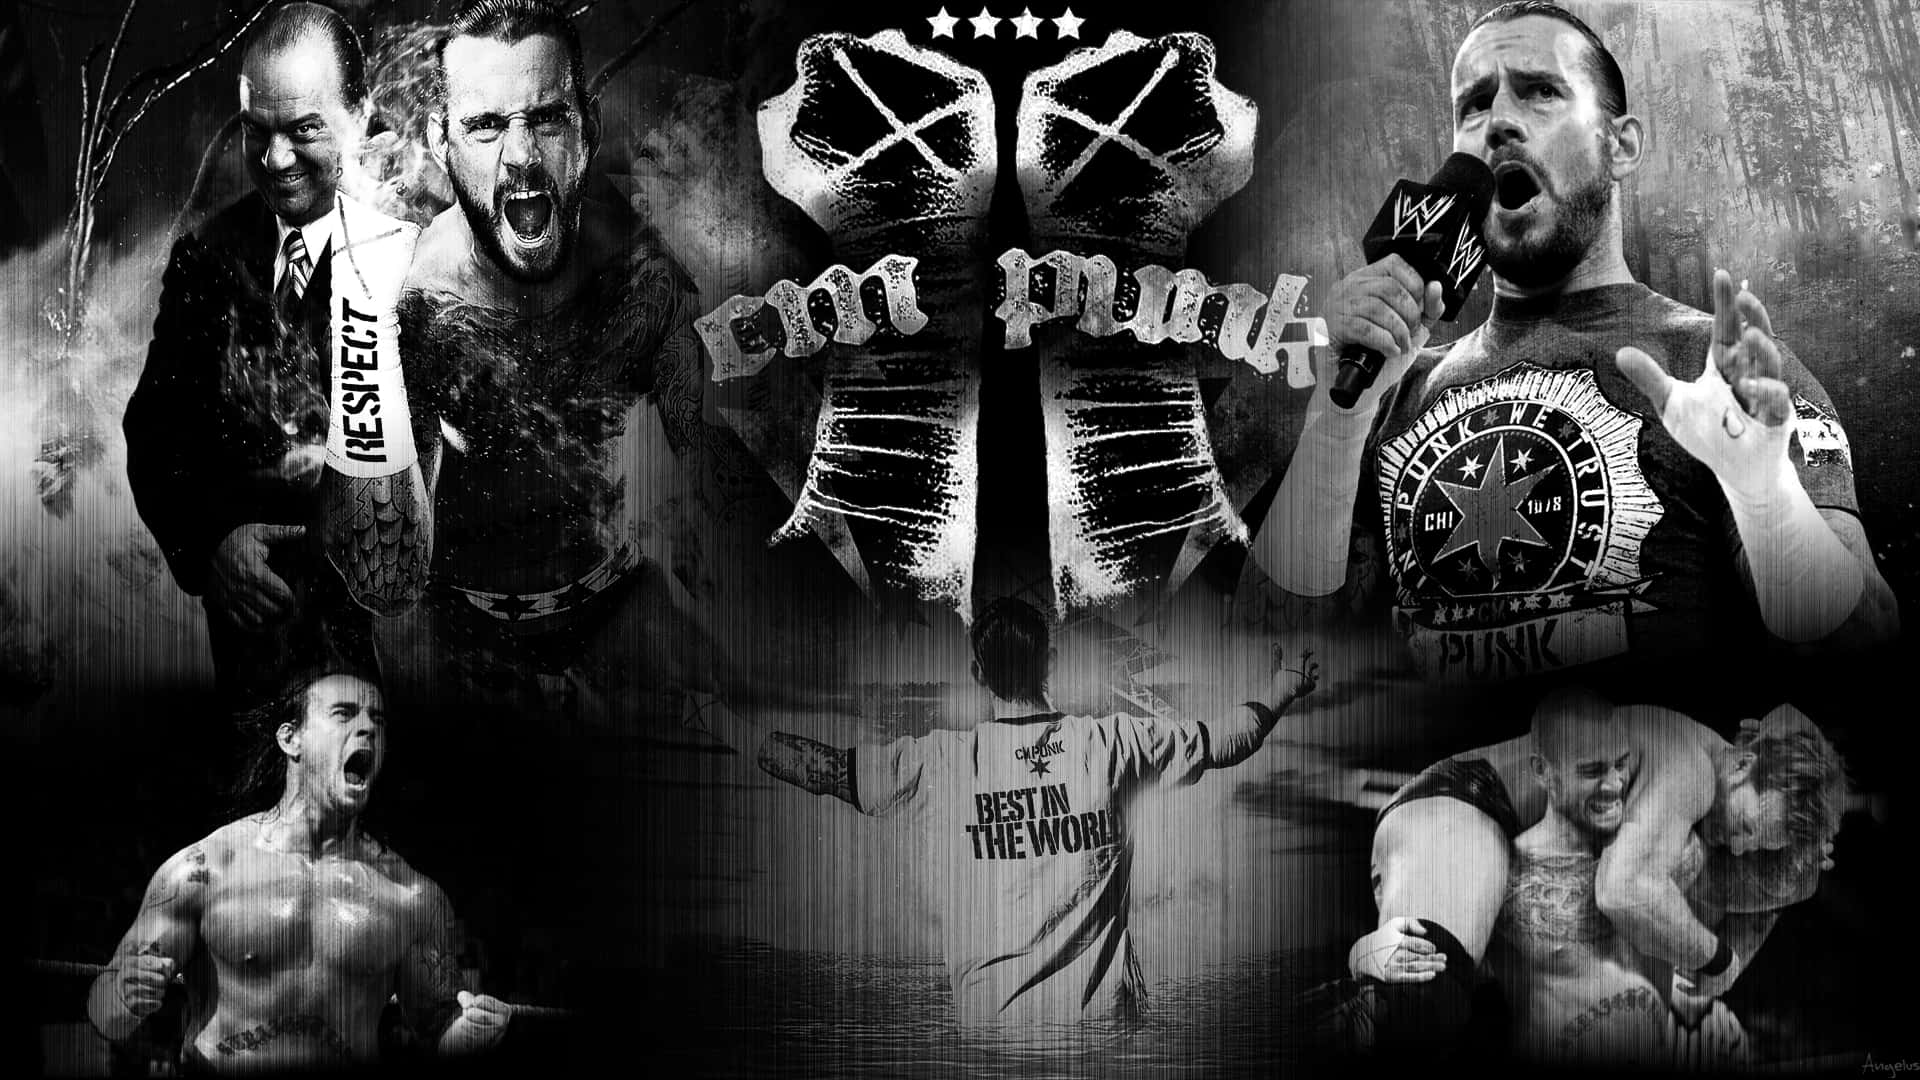 The Best In The World – Cm Punk Background